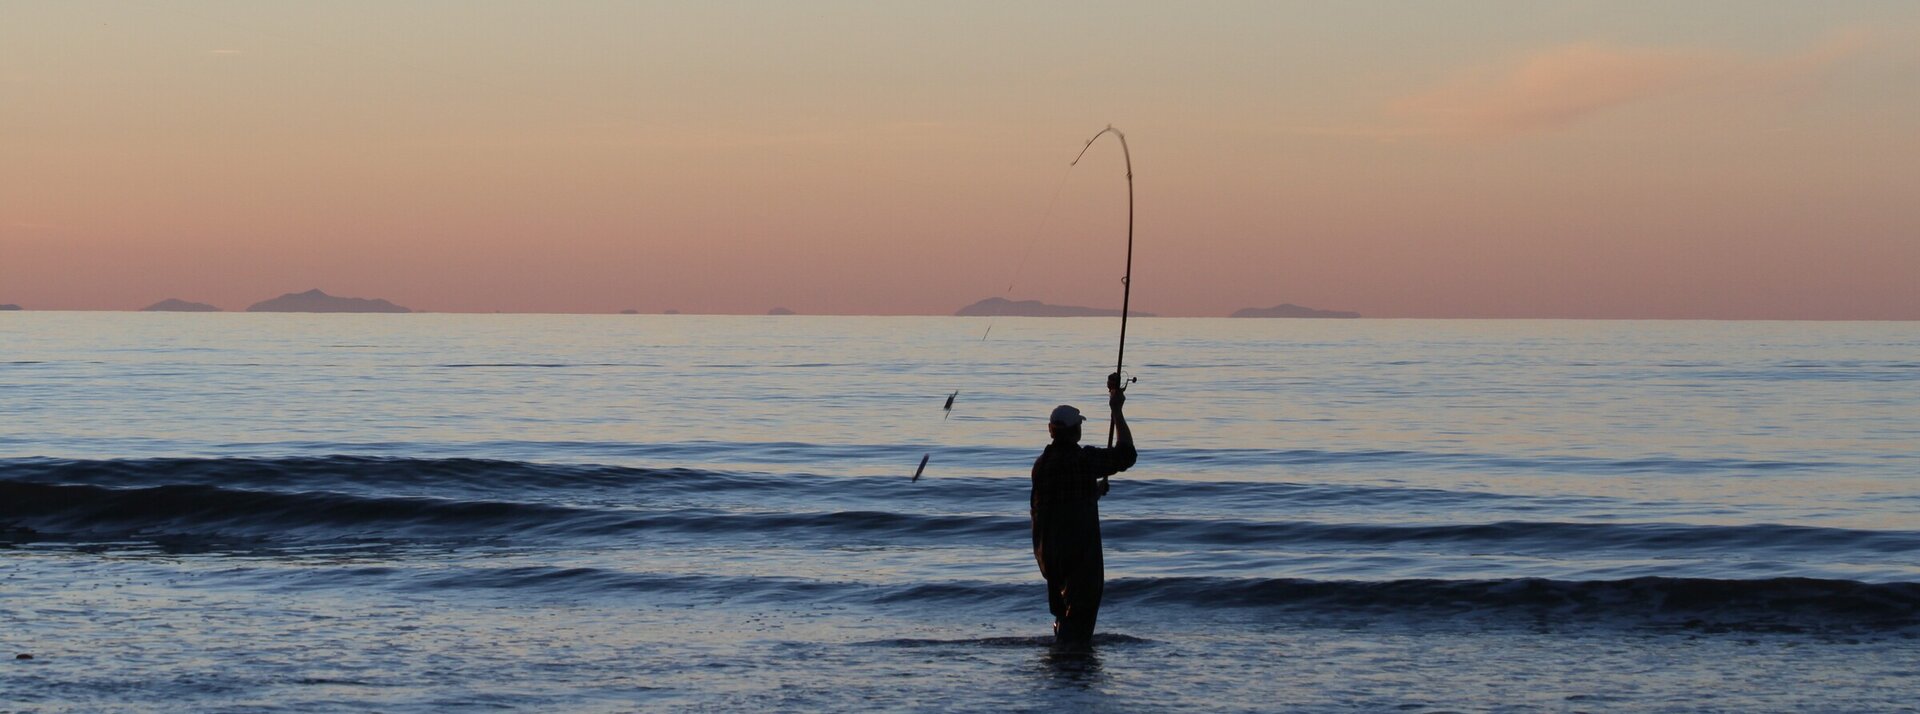 TACKLE TACTICS NZ Surfcasting and Fishing Gear